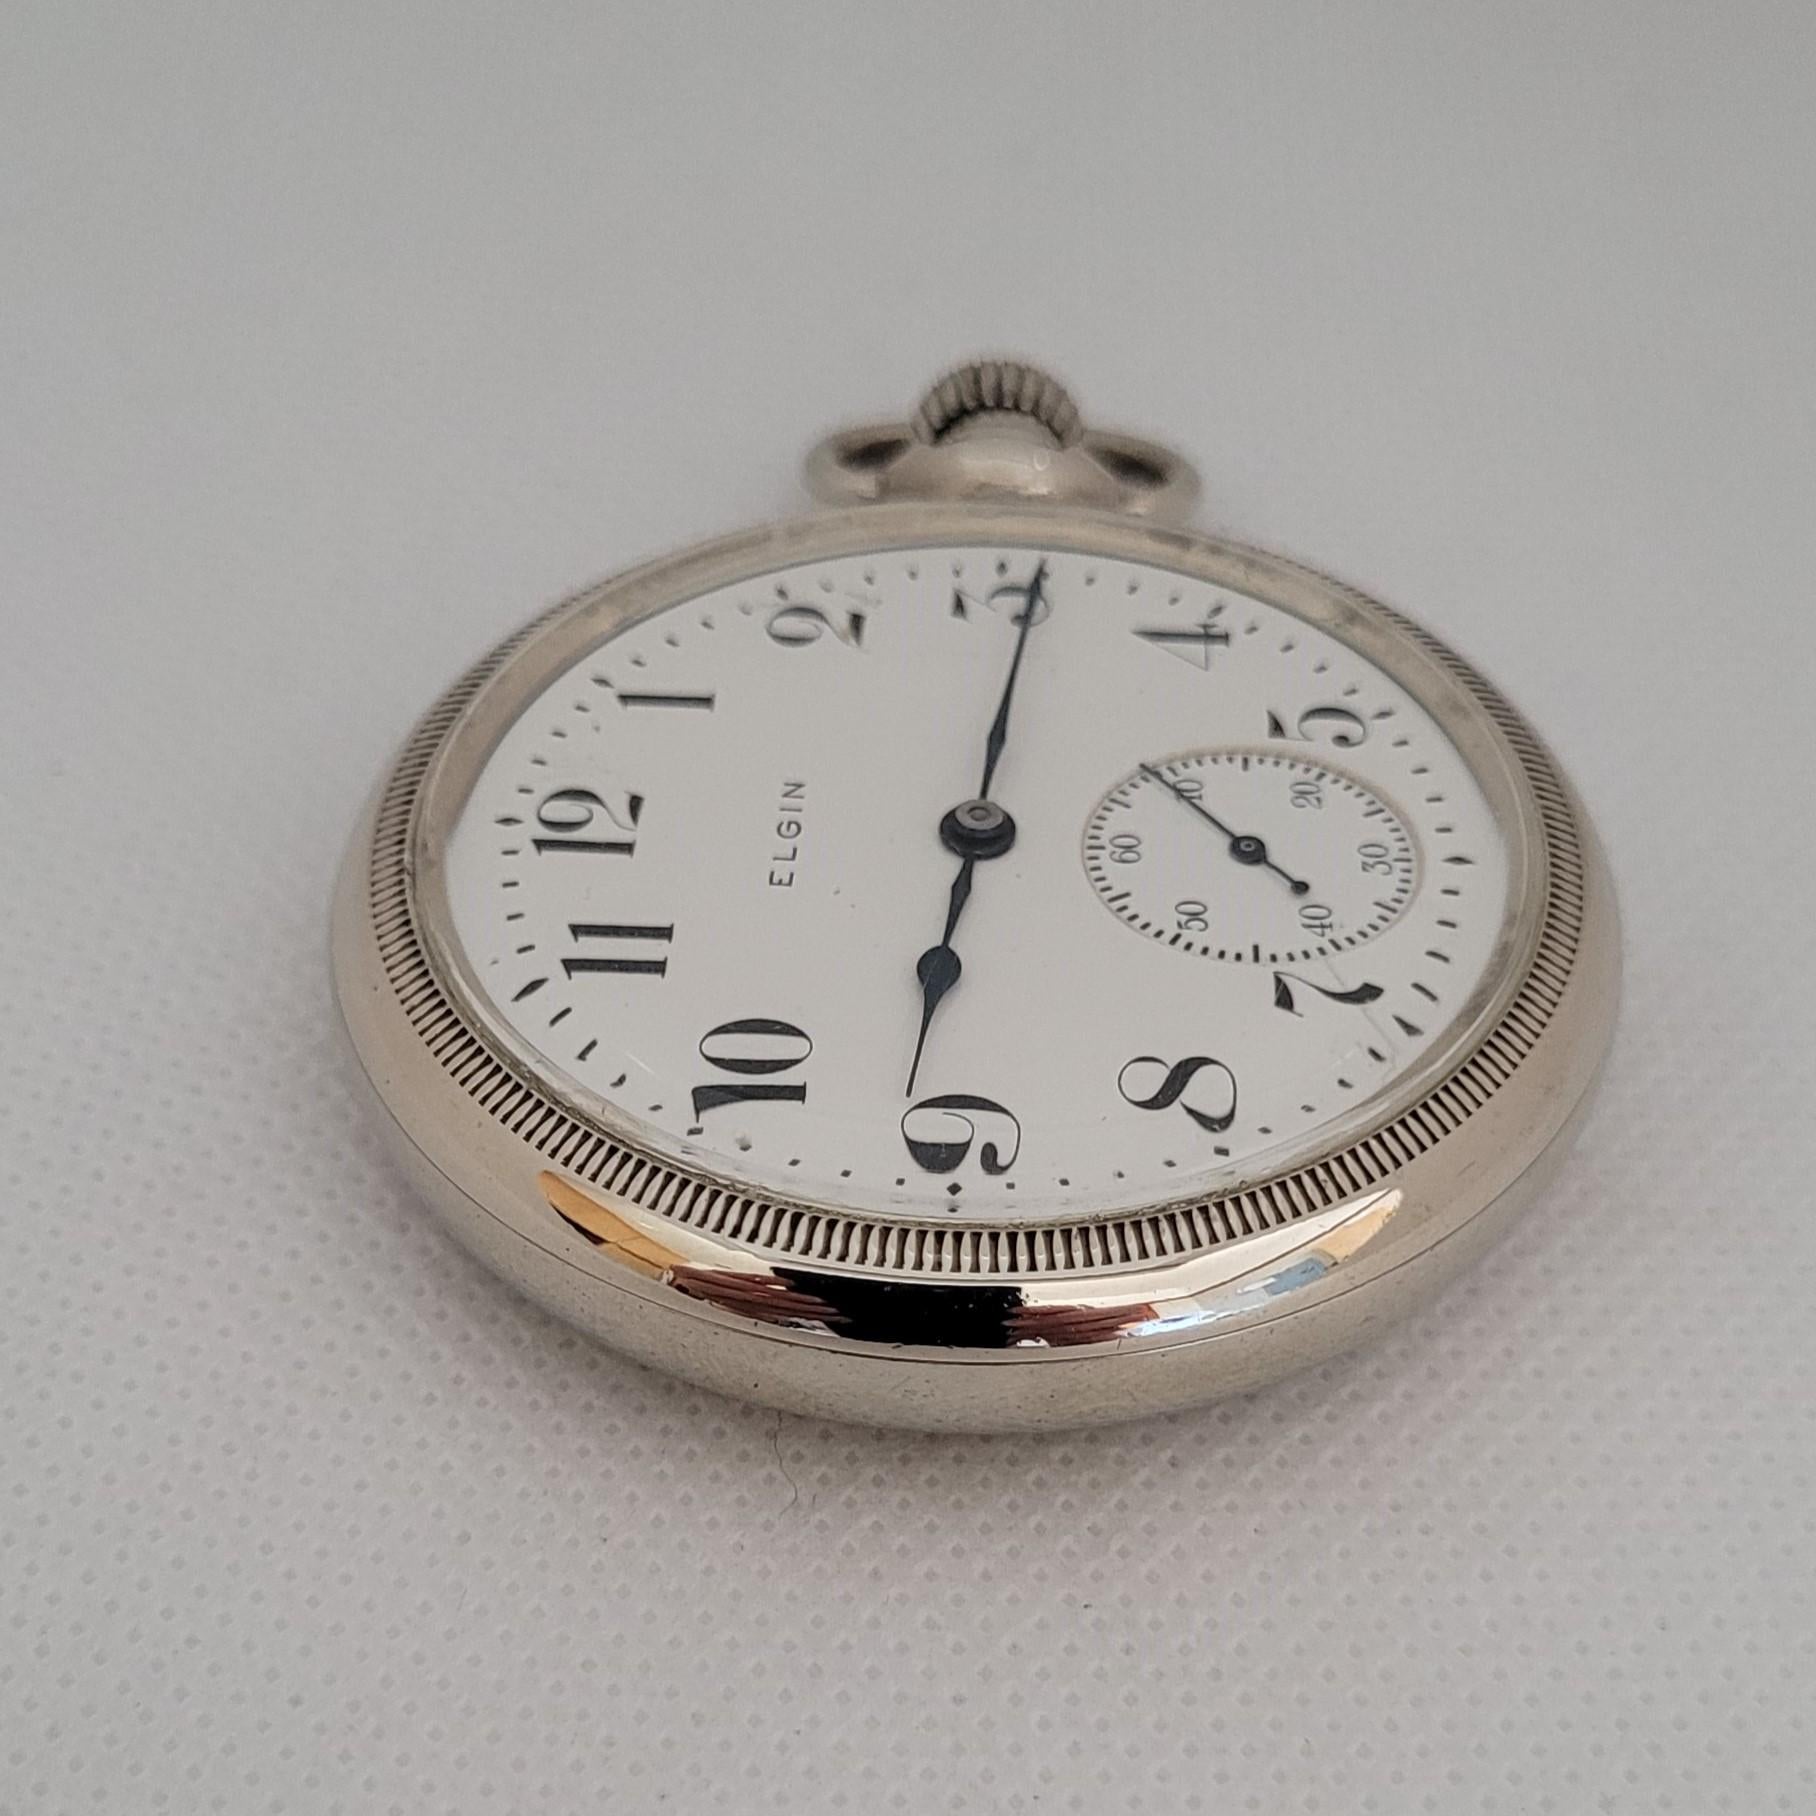 This 1906 53mm Elgin pocket watch with a white face is a stunning timepiece crafted with precision and elegance. Weighing 95.9 grams, this silver-colored watch is not only visually appealing but also made to stand the test of time. 
With a diameter